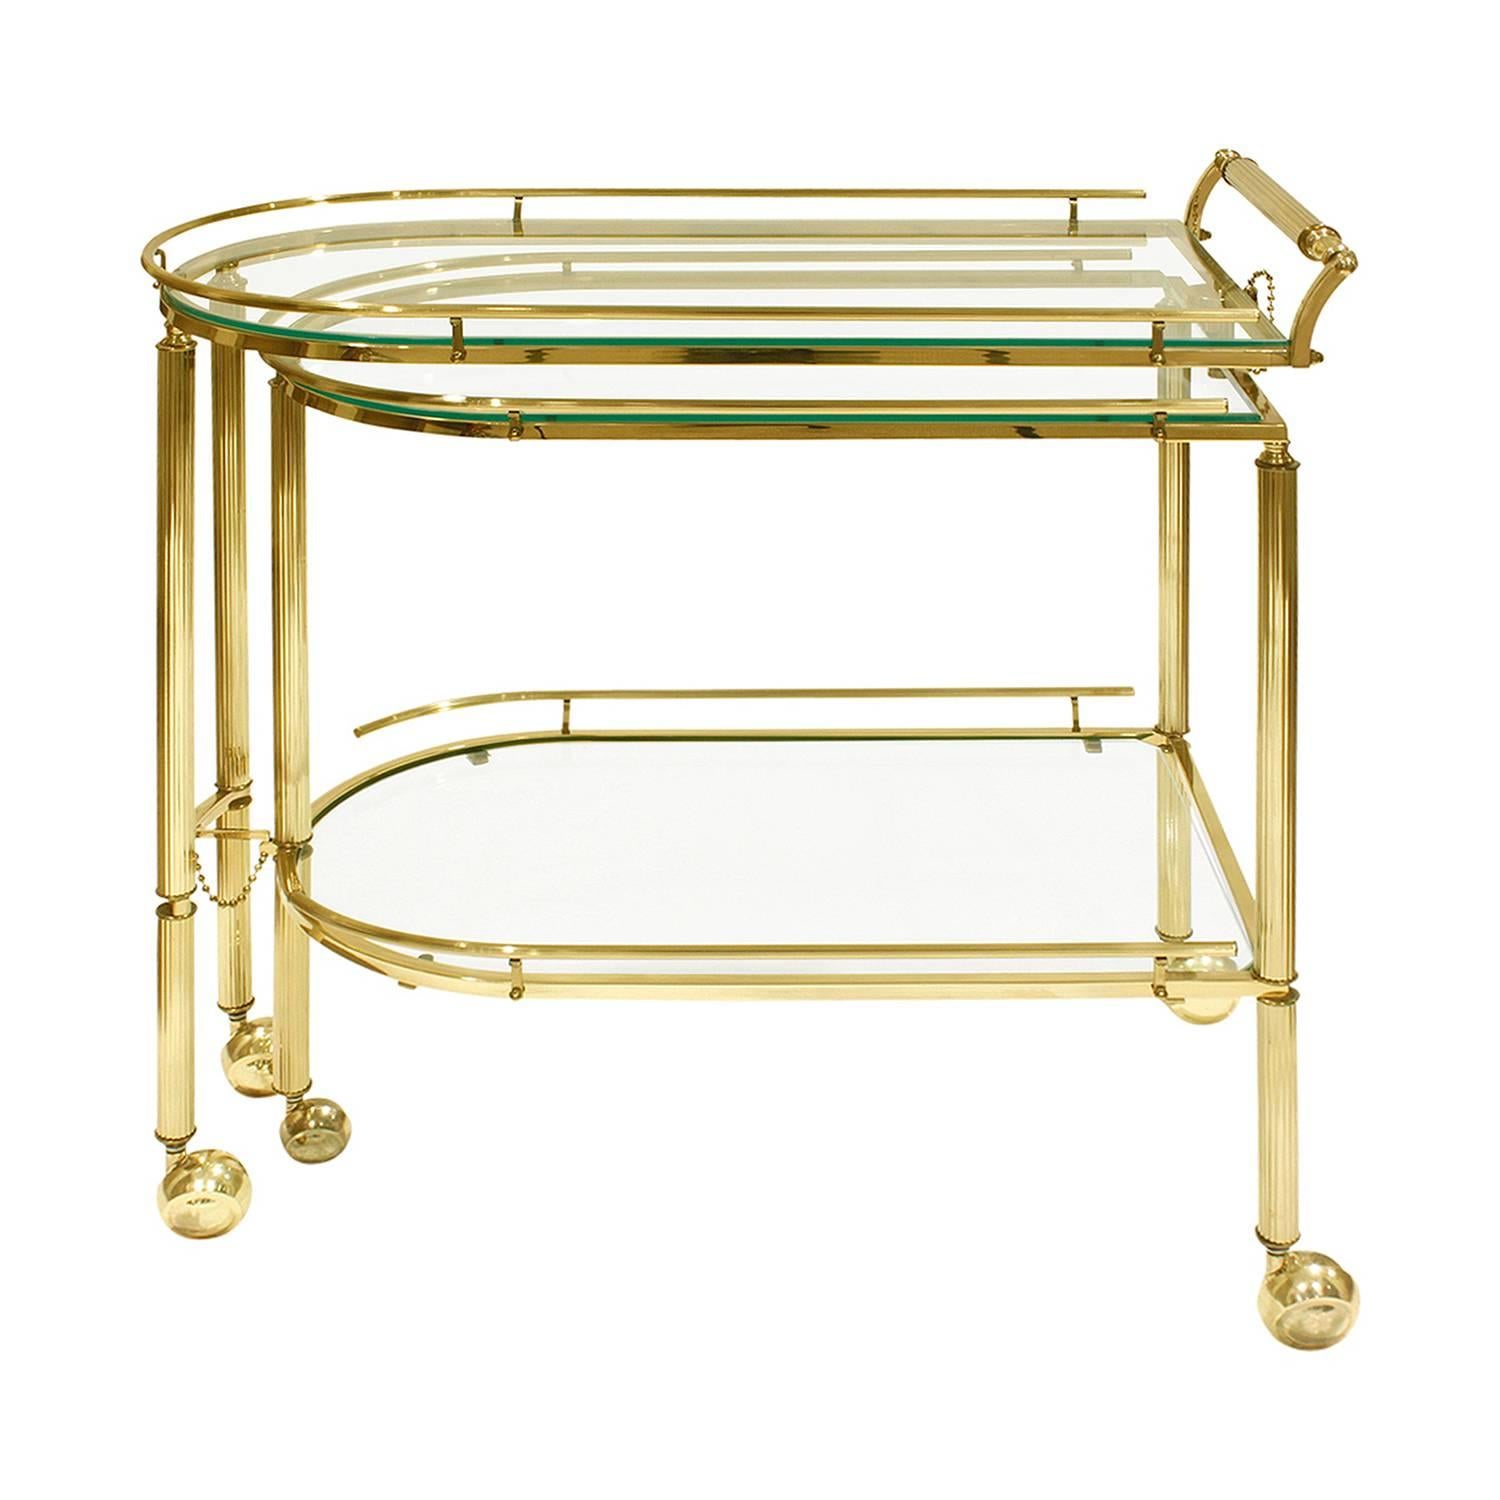 Expandable rolling serving cart in channelled brass with glass shelves attributed to Mastercraft, American, 1960s. This is a clever design which provides a lot of serving space.

Cart is 54 inches long when fully extended.